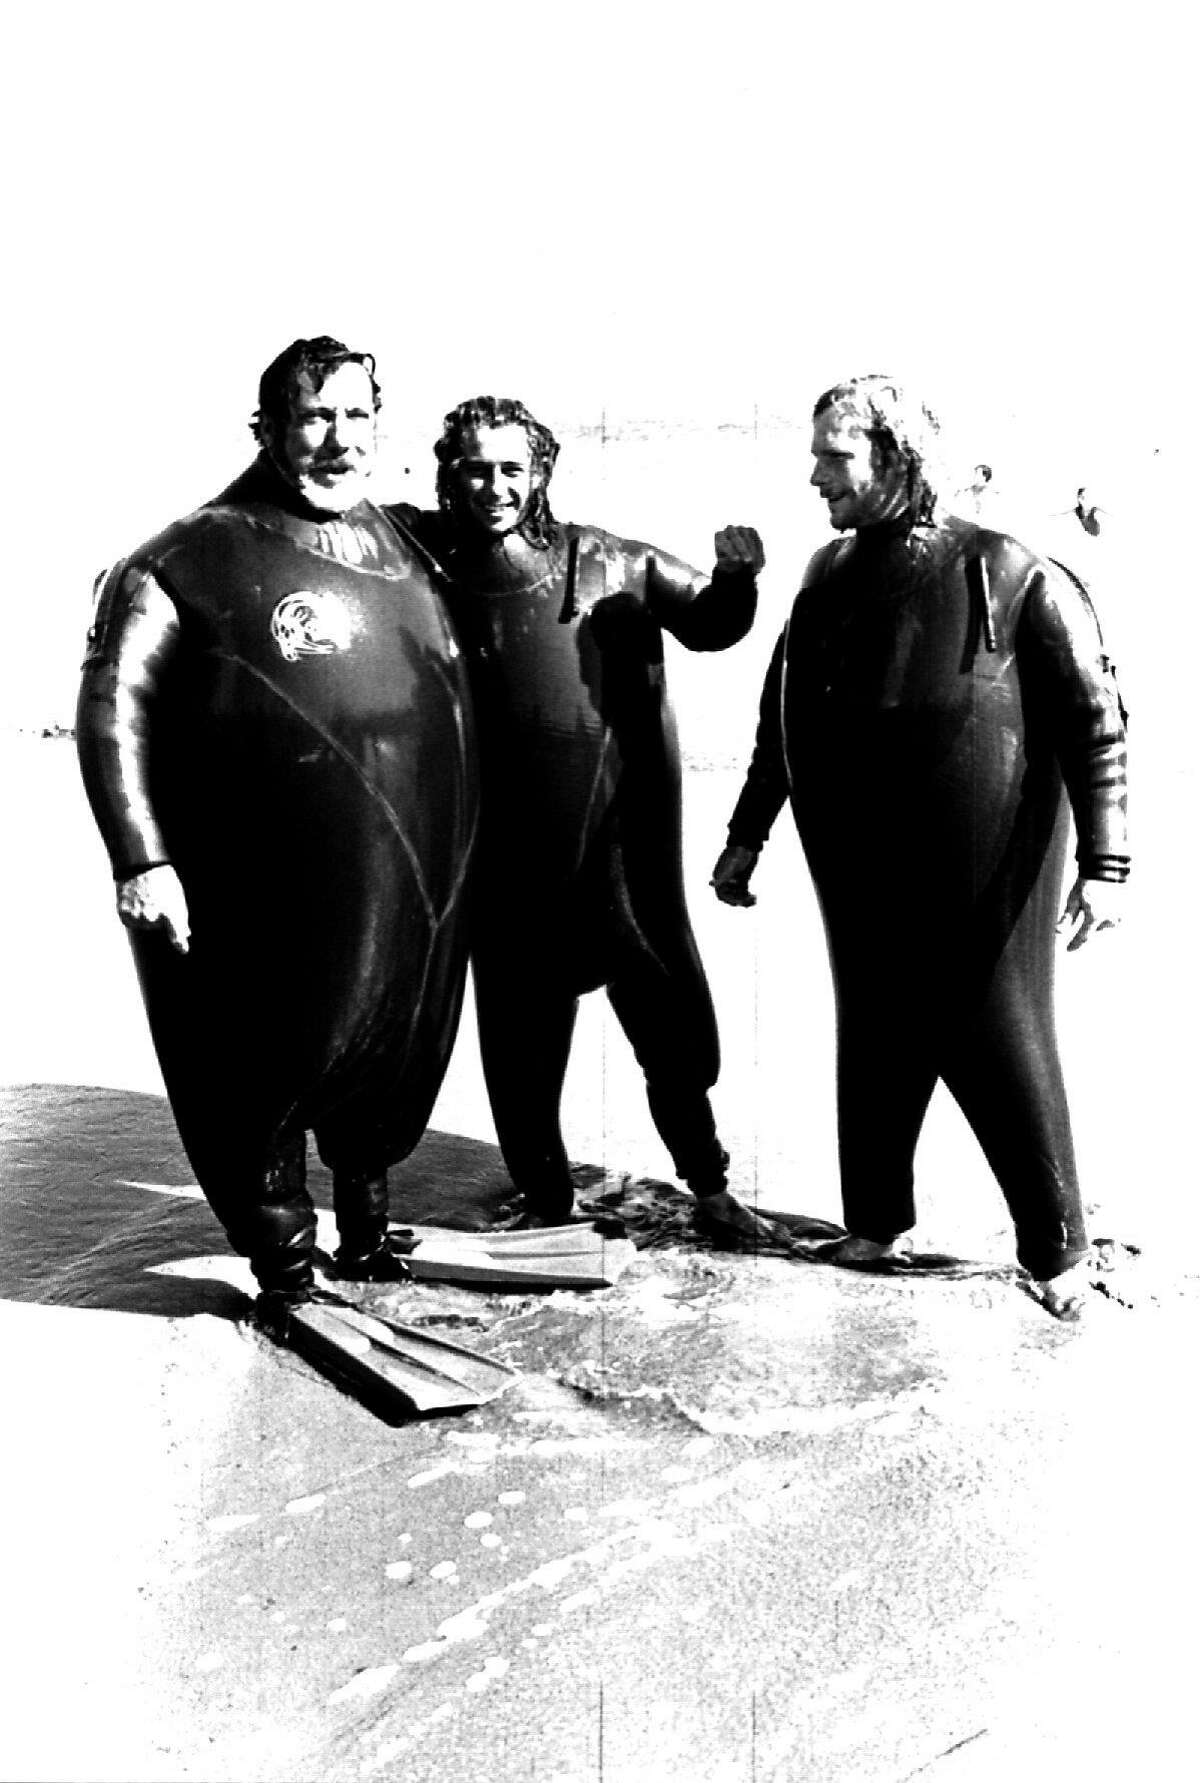 Wetsuit inventor Jack O'Neill